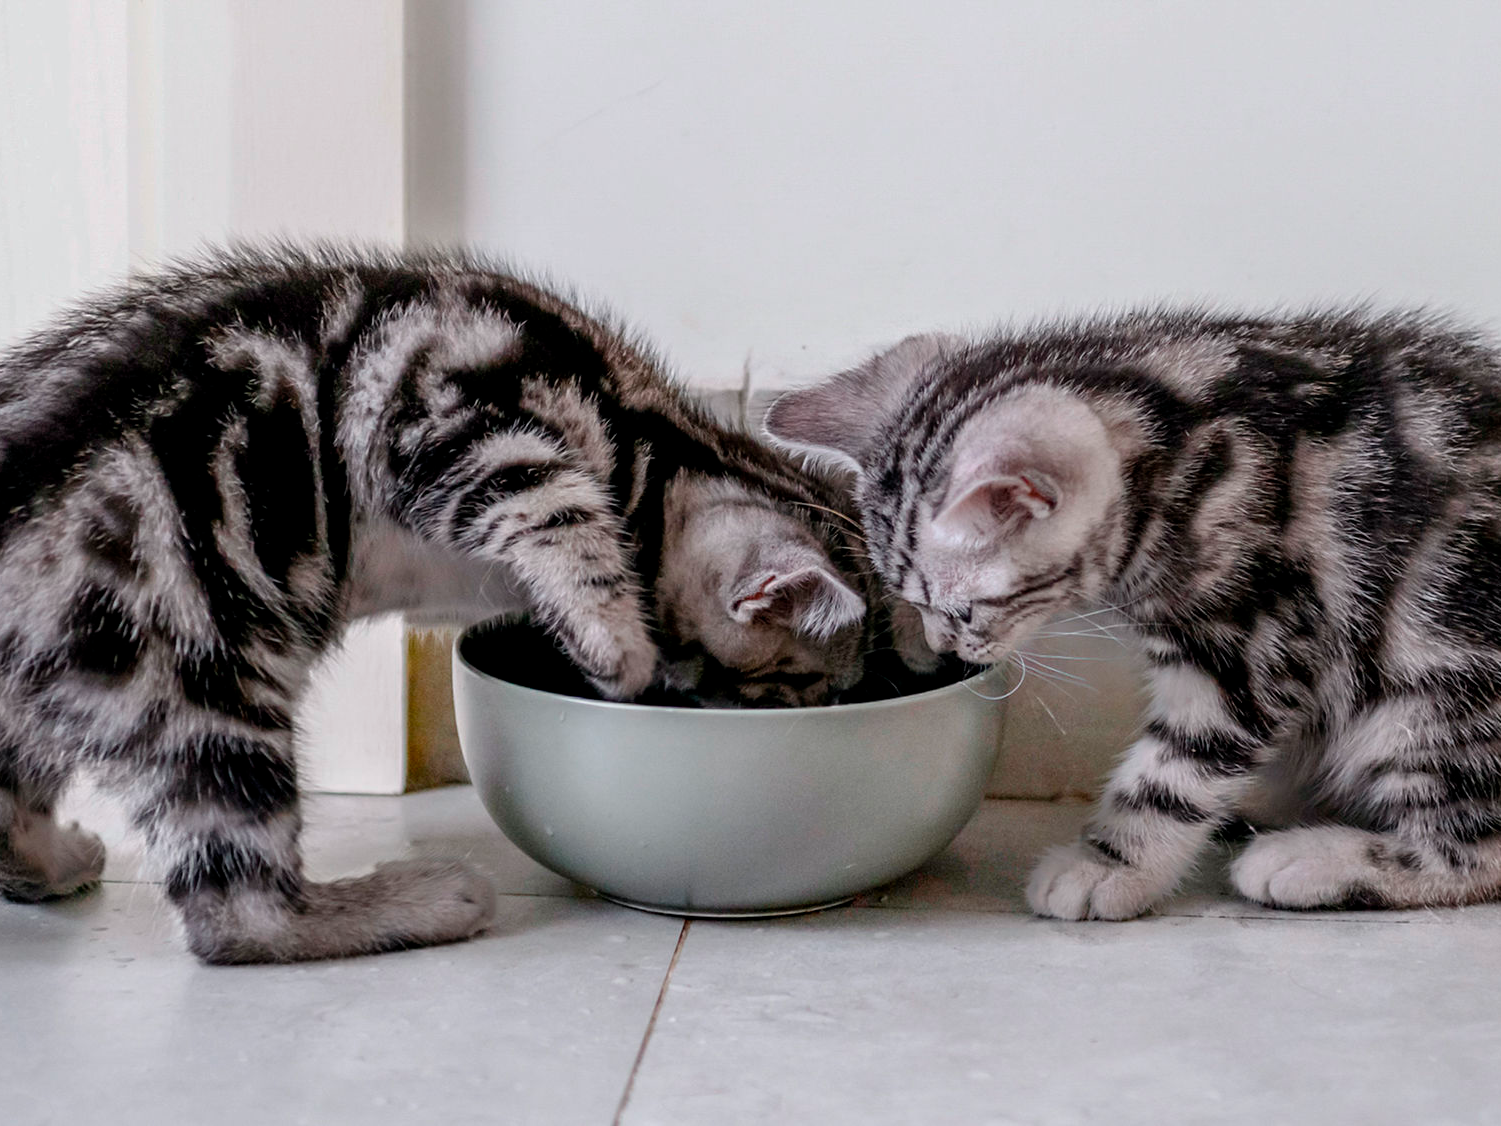 Kitten cat sitting indoors by a silver bowl